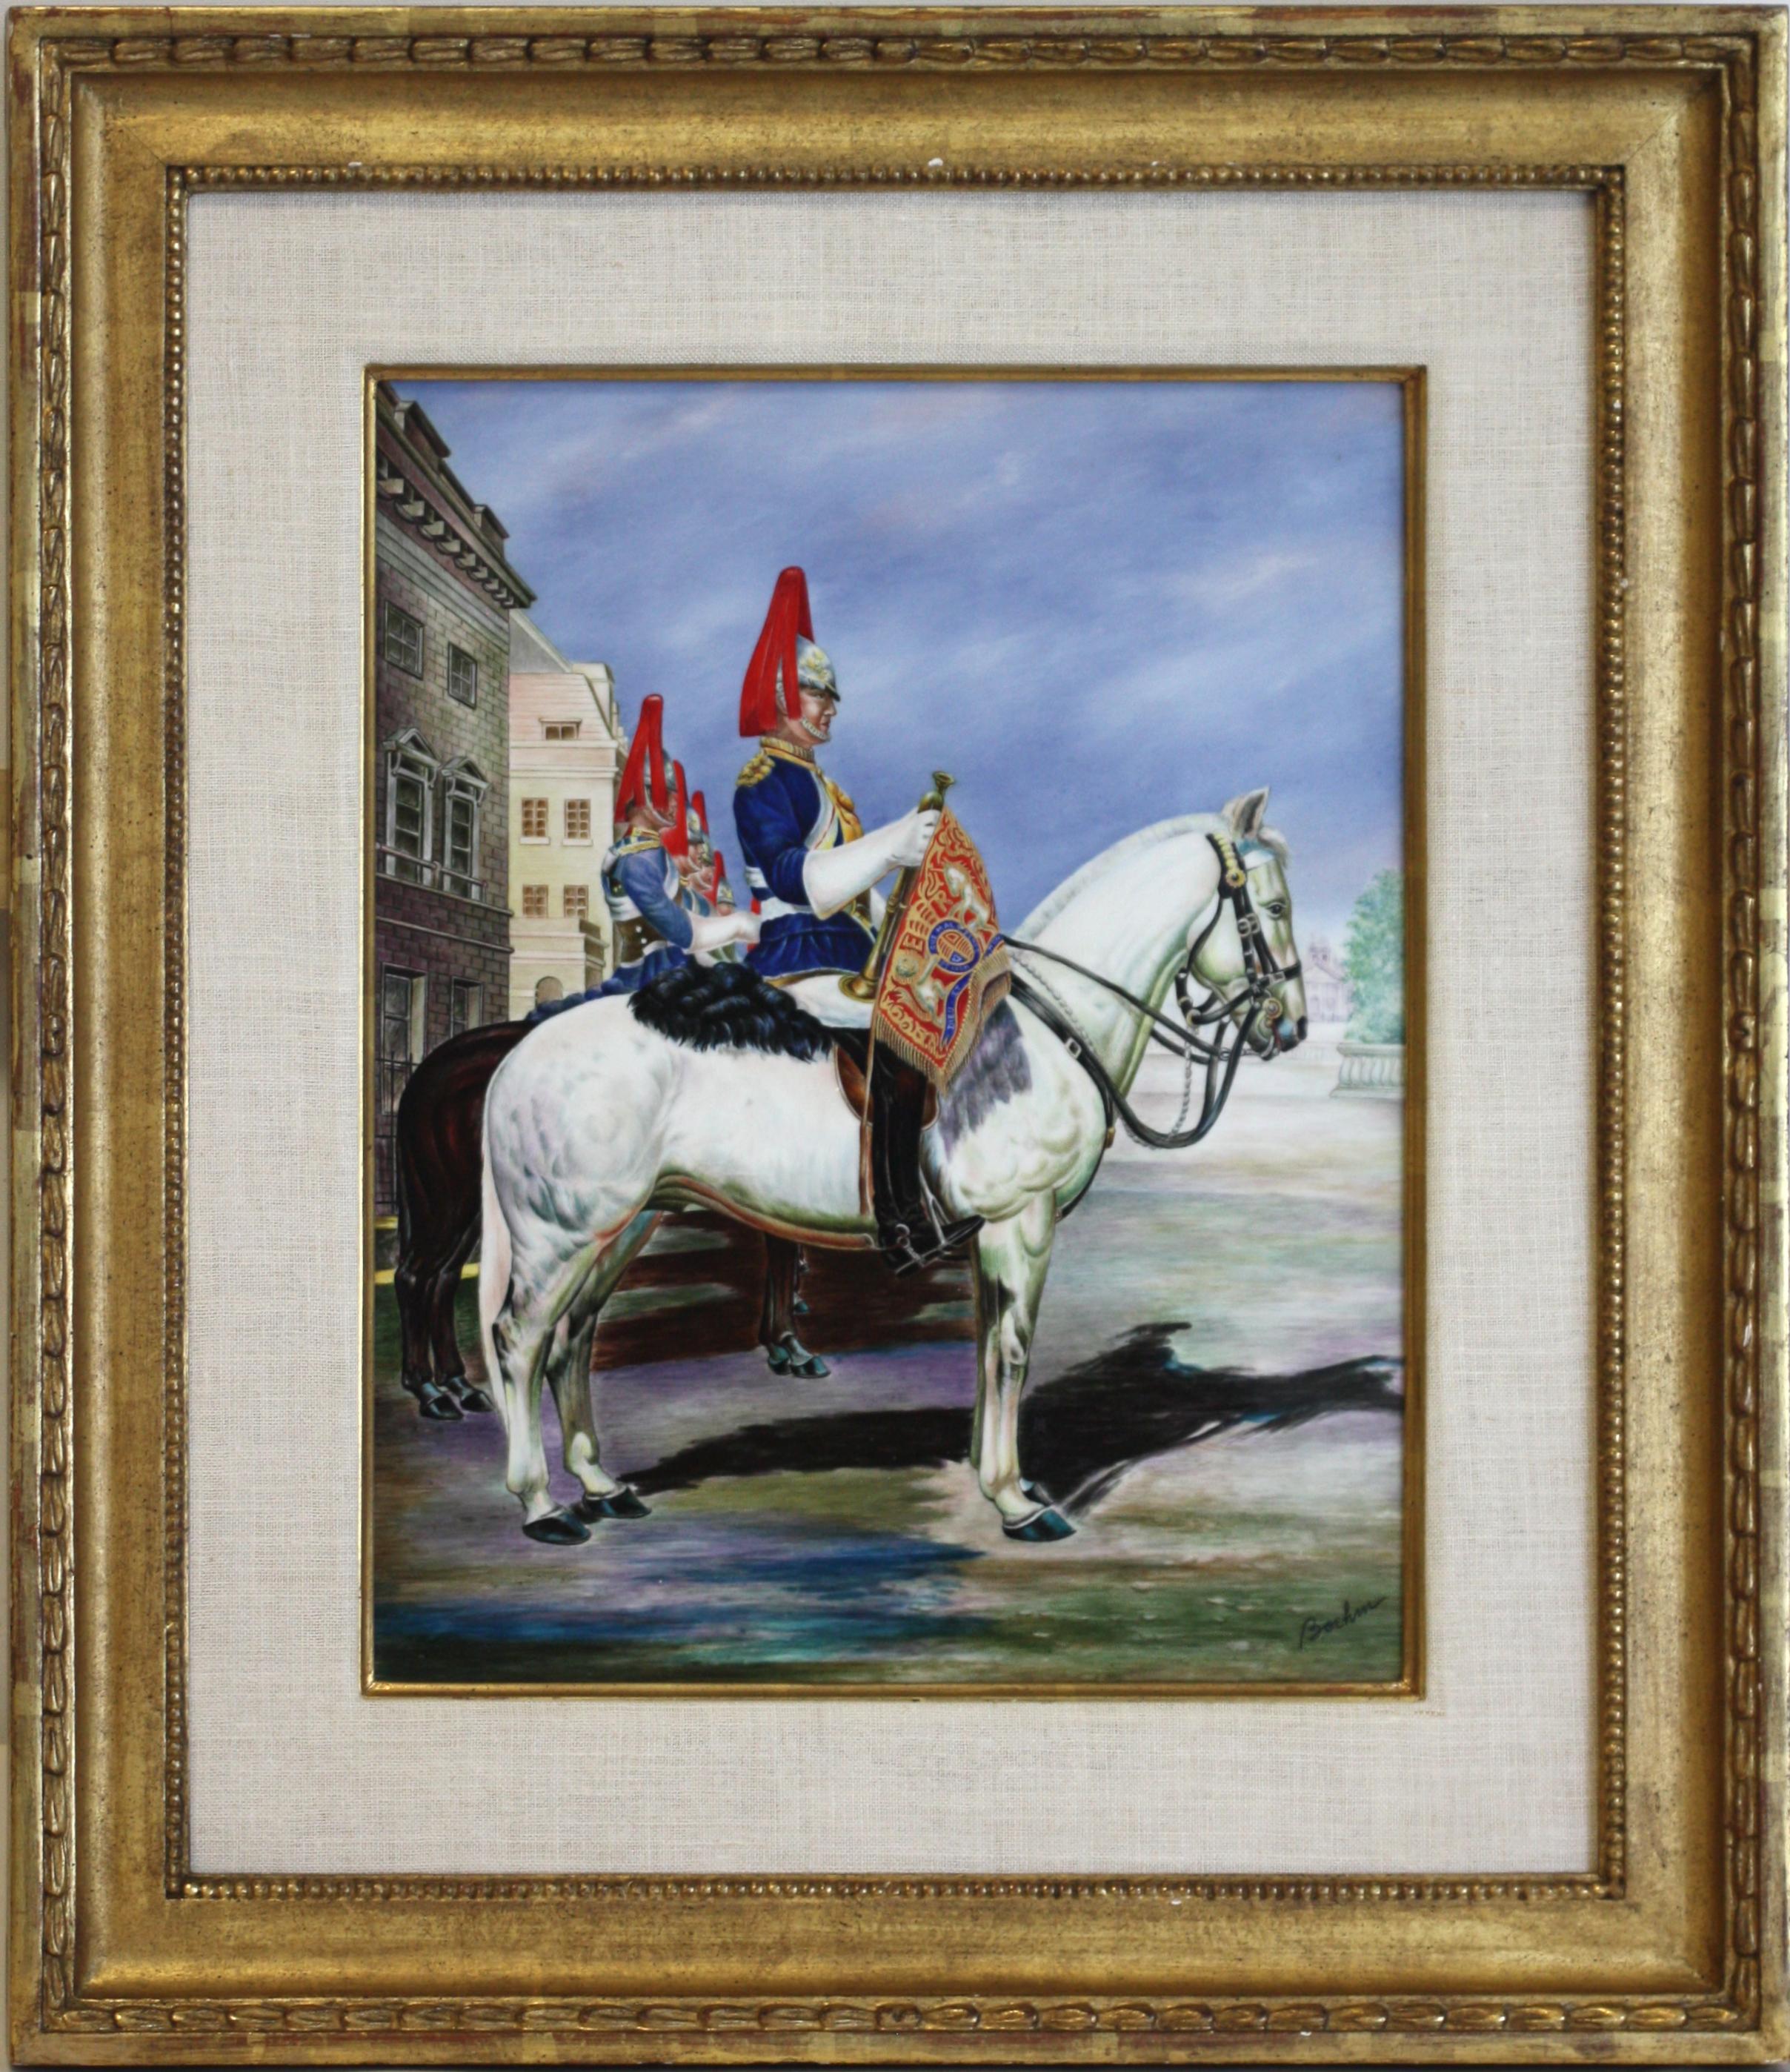 
Boehm Porcelain Equestrian Plaque
Titled, Royal Horse Guard, 1996 by A.L. Fritchey, edition limited, number 5, dated 1996 
sight 14 by 11 in. (35.56 x 27.94 cm.), overall, in a gilt frame 22 by 19 in. (55.88 x 48.26 cm.)
